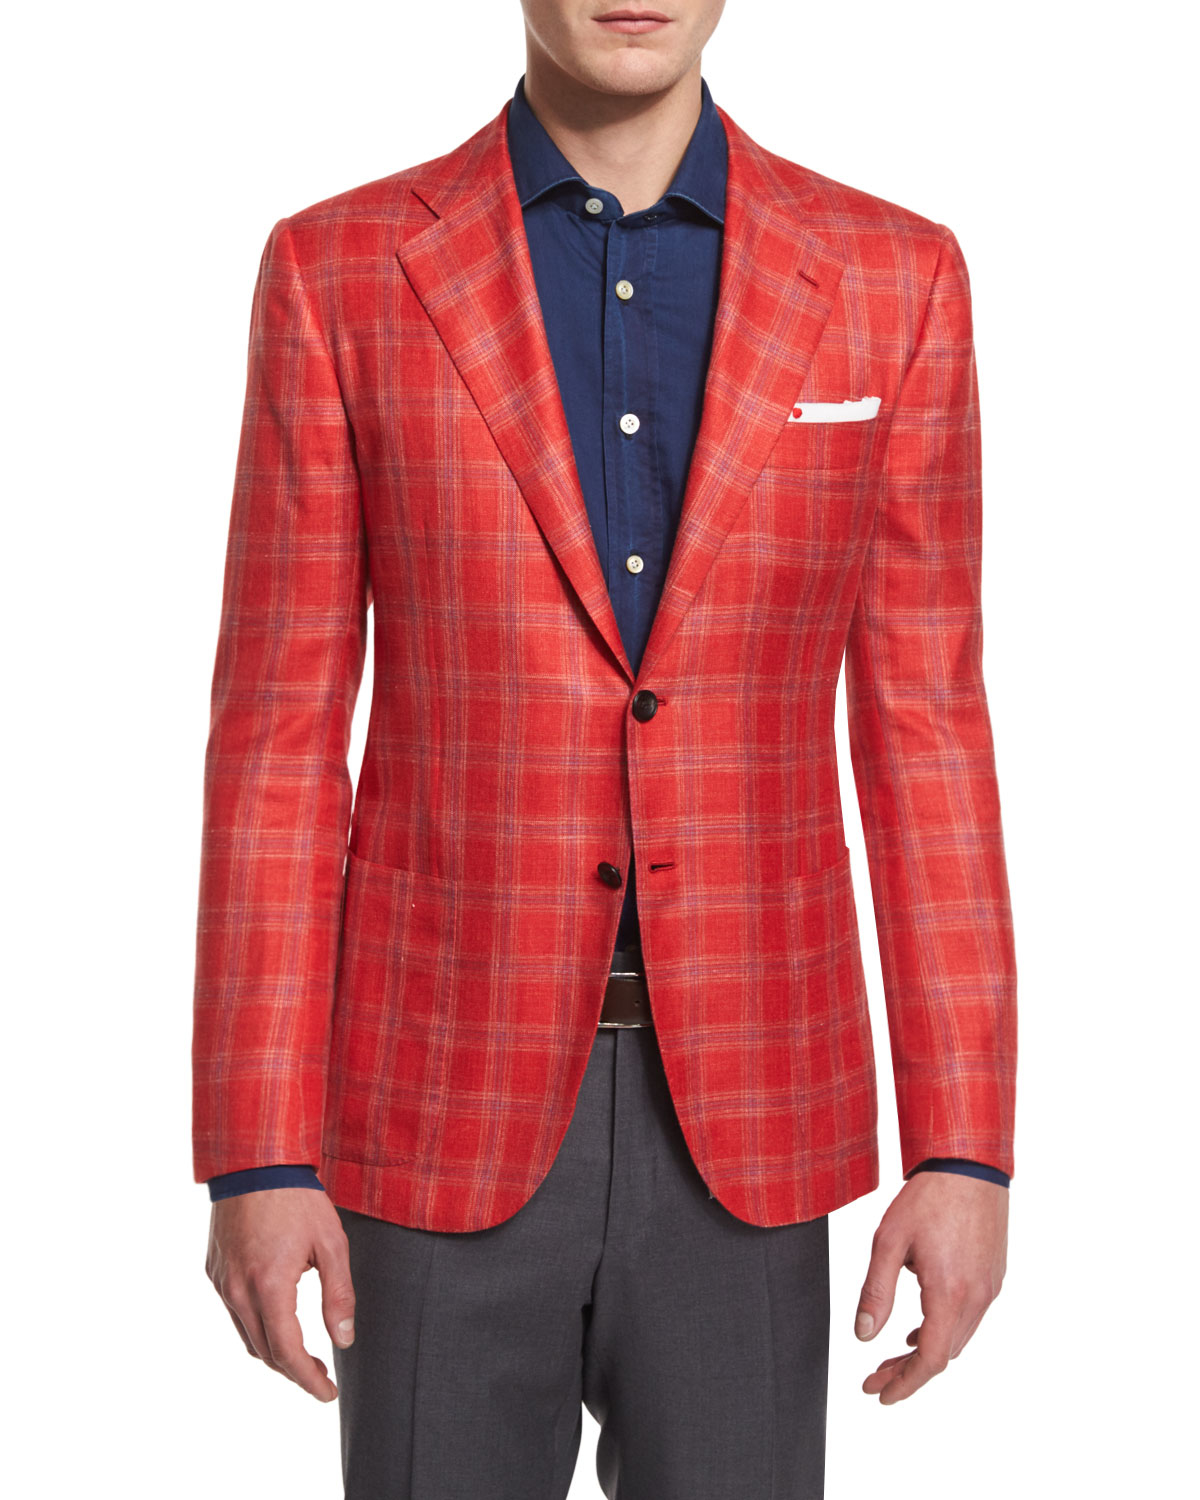 Kiton Cashmere-blend Plaid Sport Coat in Red for Men - Lyst